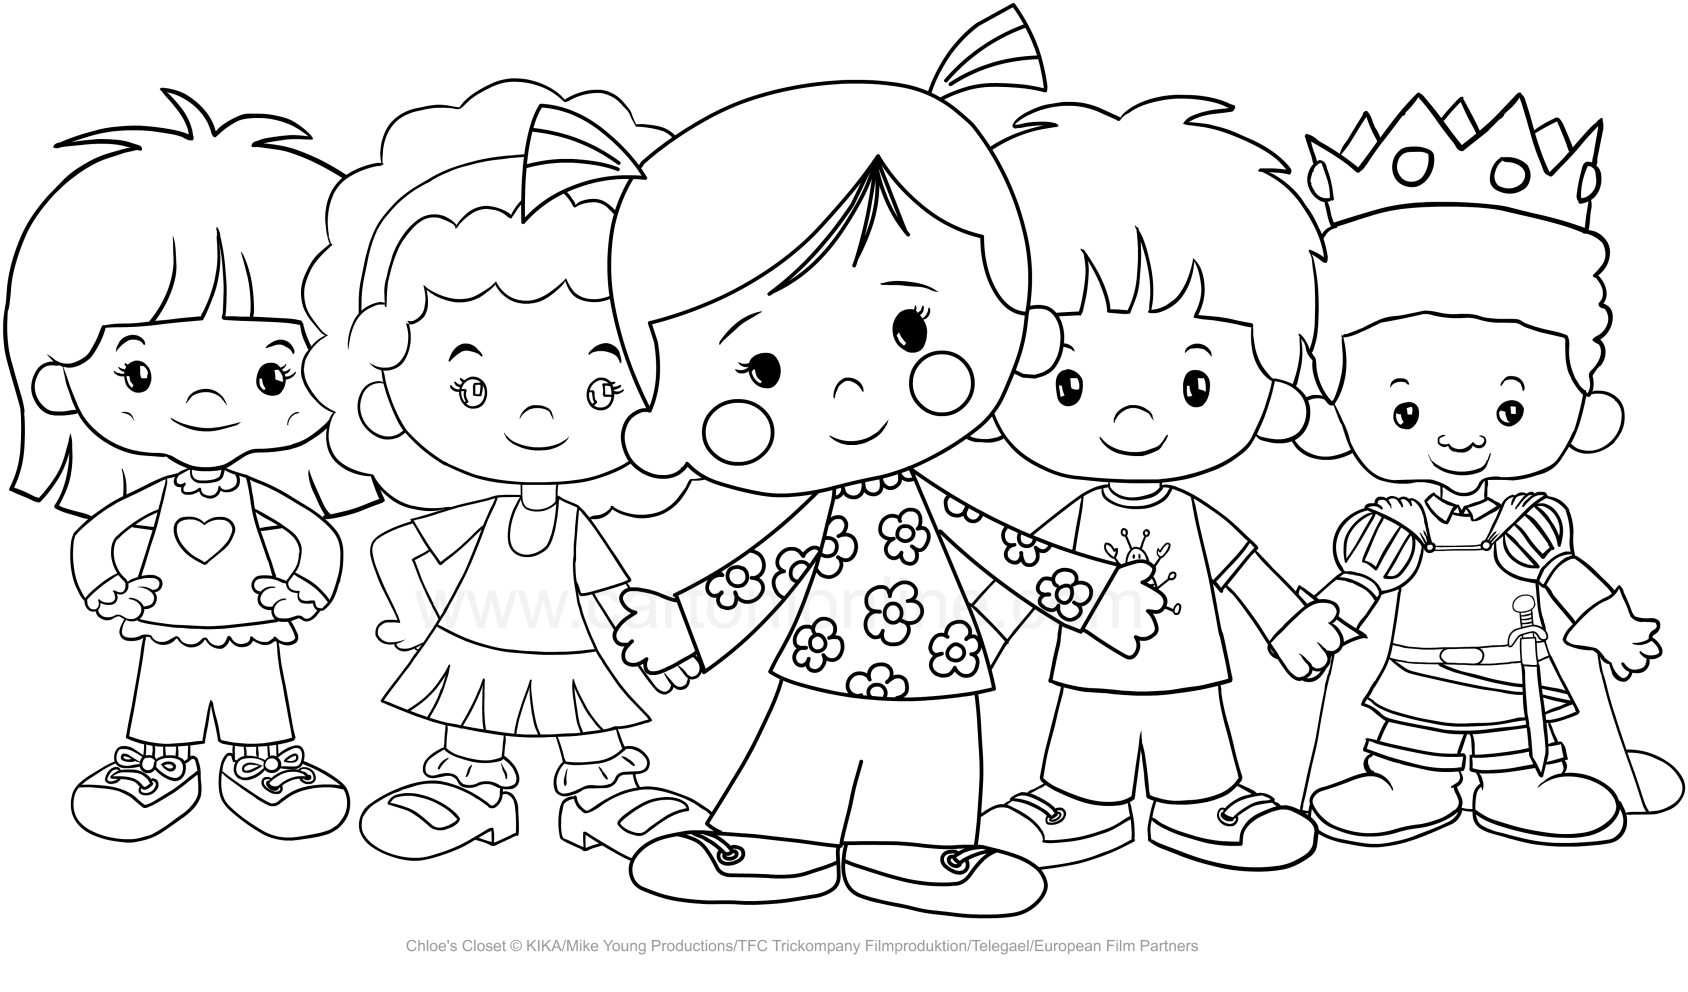 Drawing Chlo and her friends (Chloe's Closet) coloring pages printable for kids